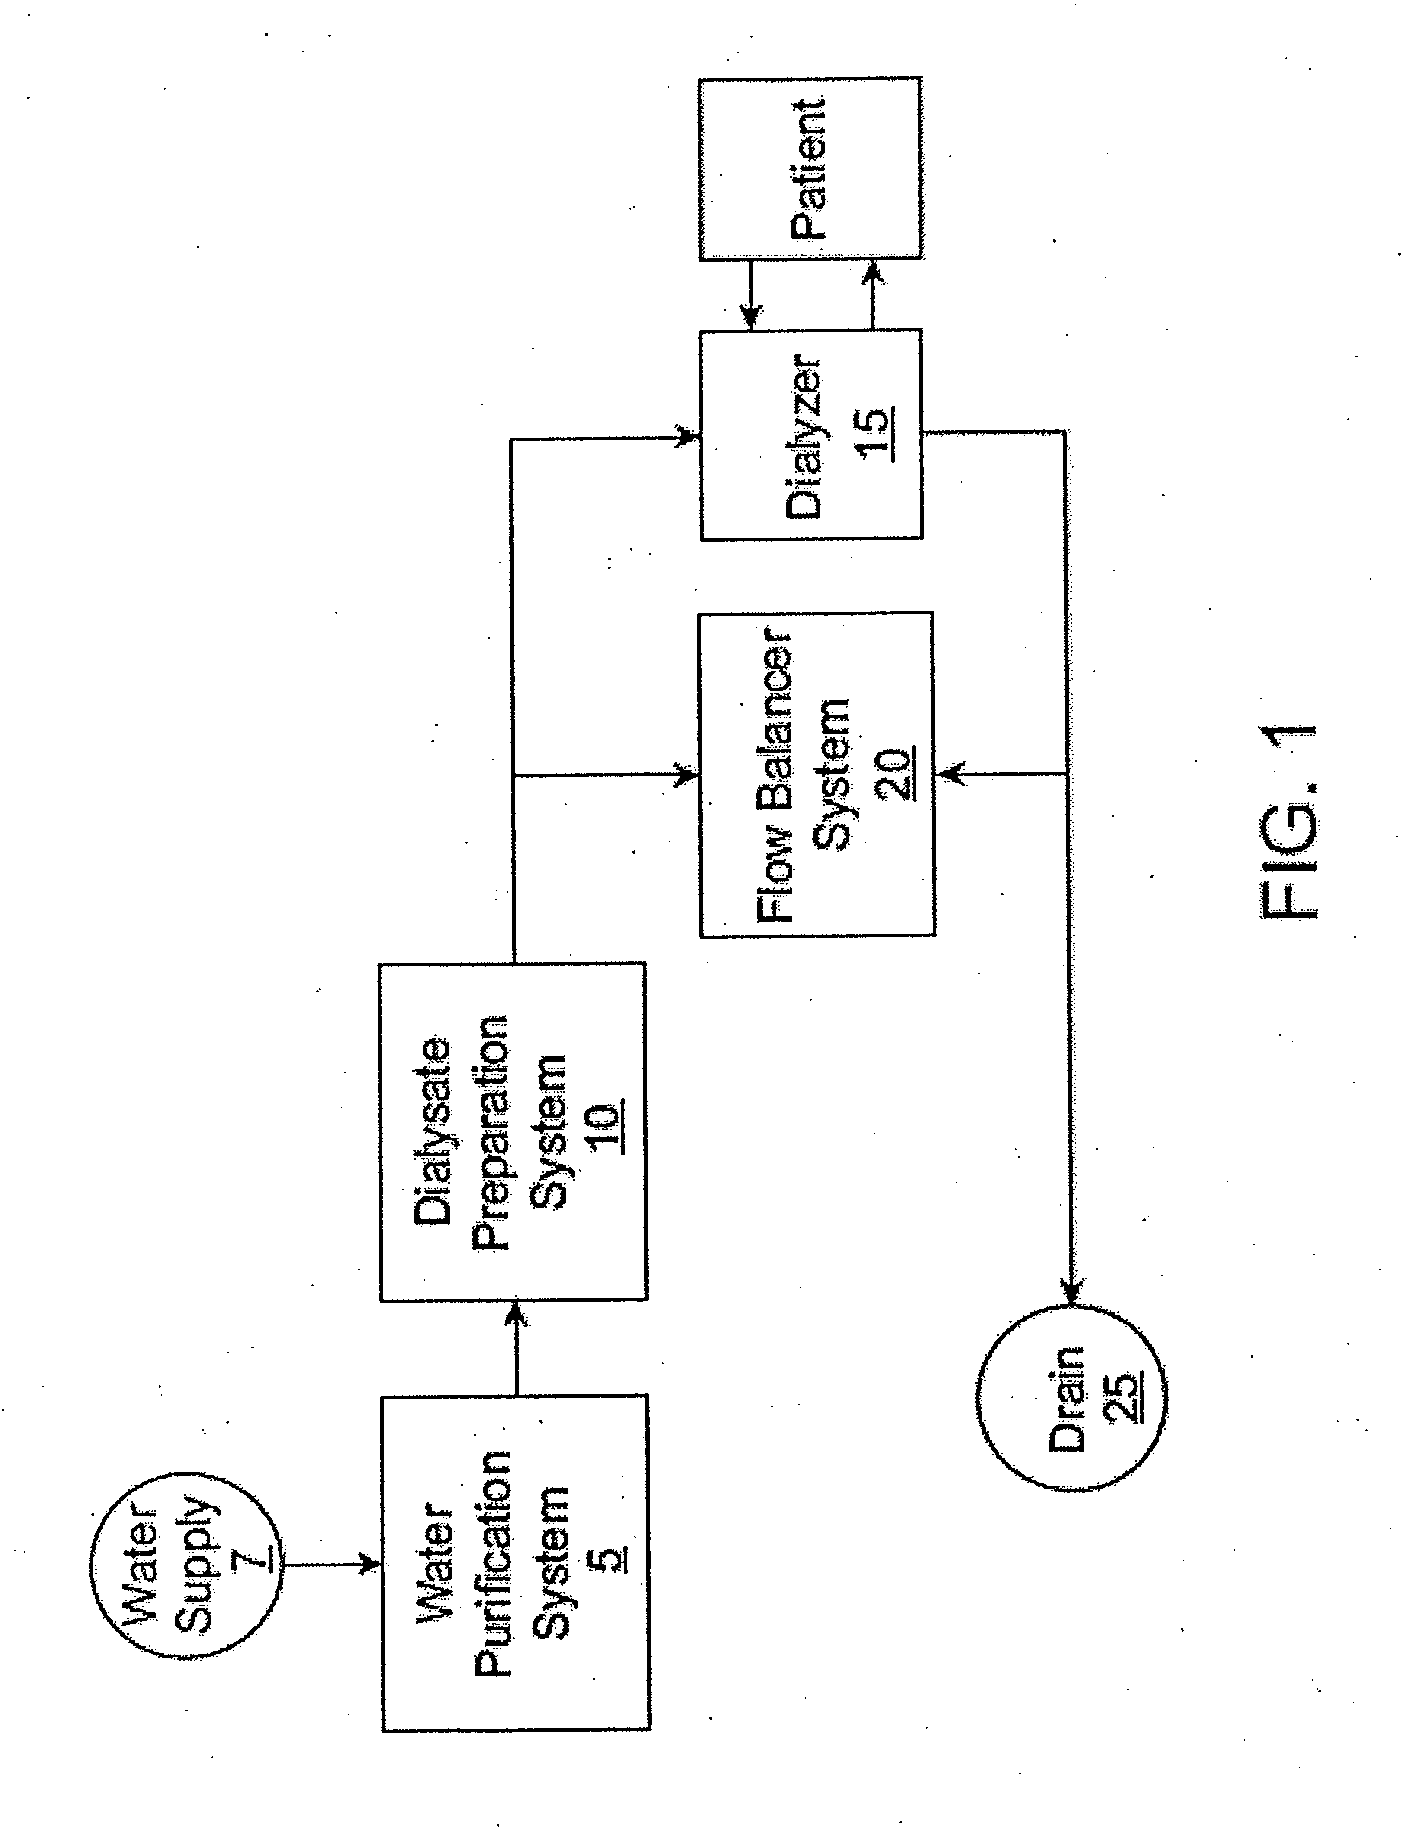 Dialysate mixing and dialyzer control for dialysis system